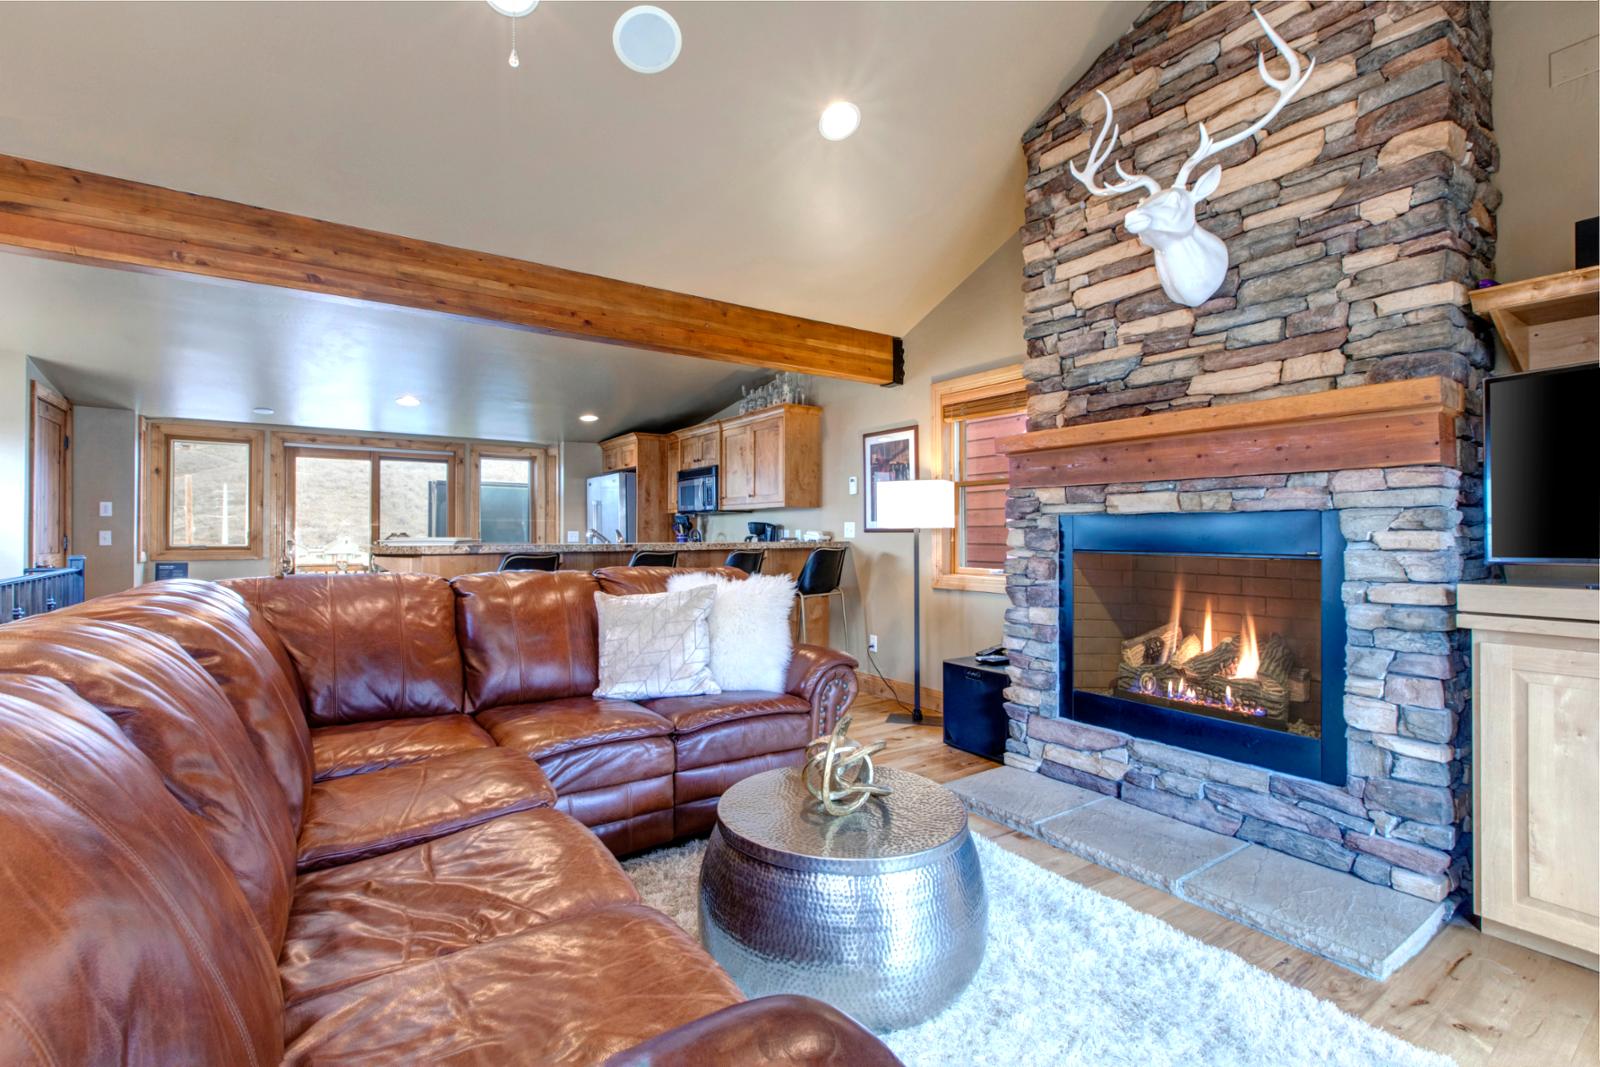 Property Image 1 - PNF-860 Walk to Slopes - 3Bdrm, hot tub, fire pit, mountain view, easy walk Main St!